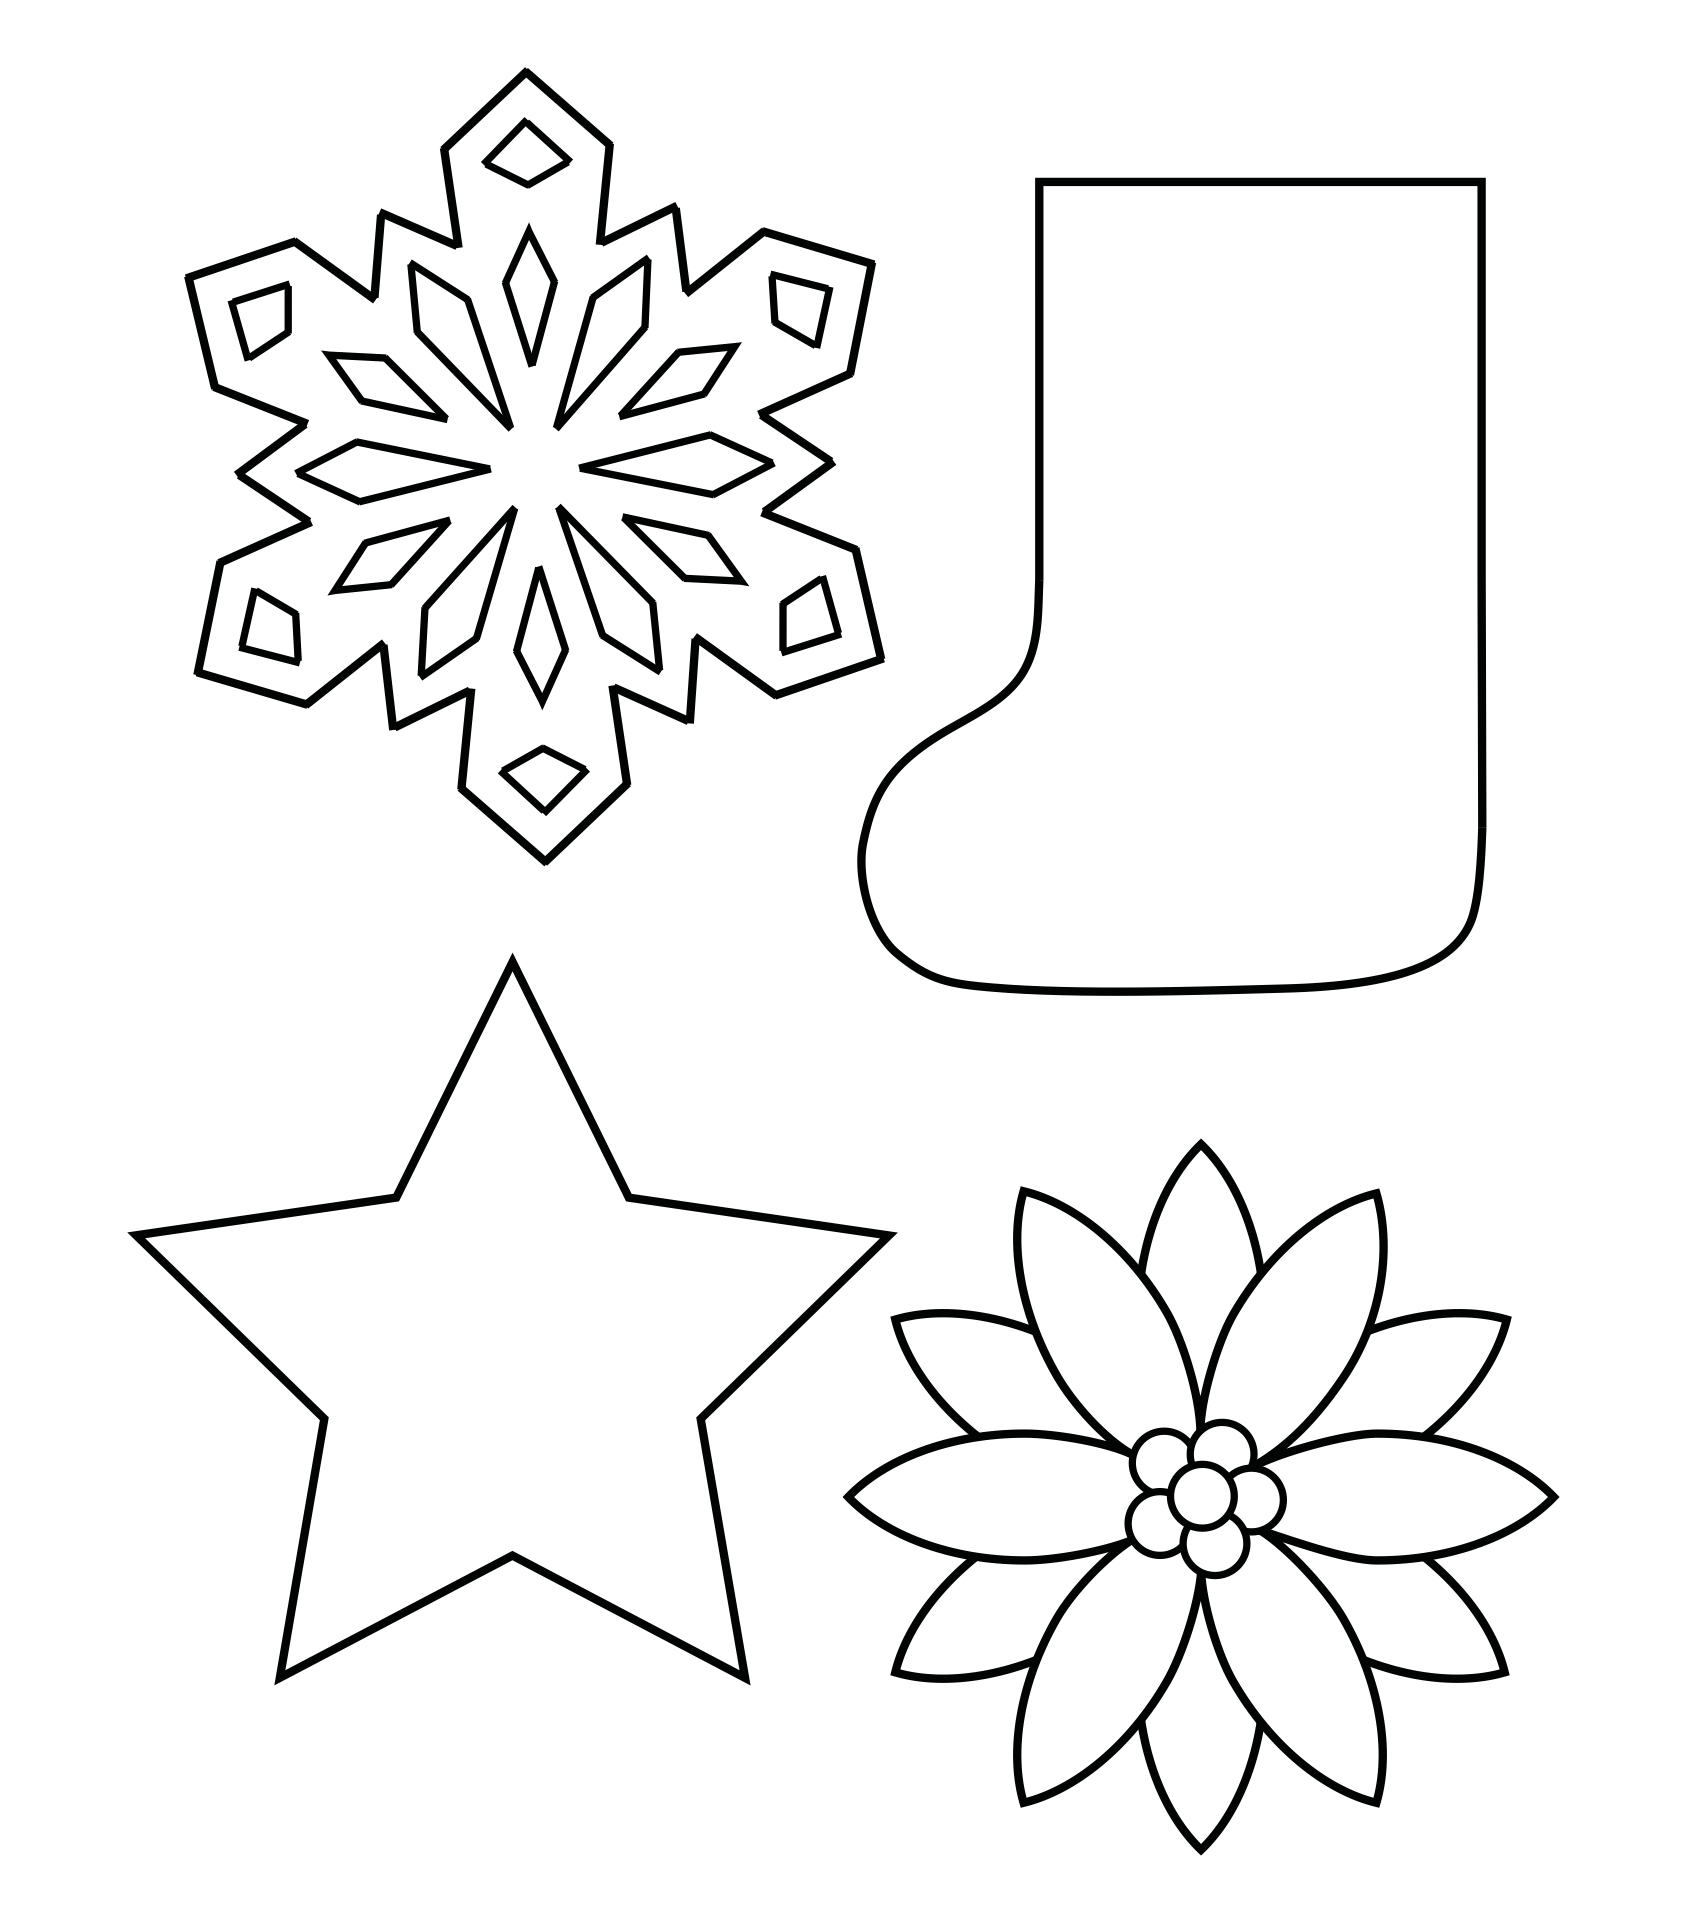 6 Best Images of Free Printable Christmas Shapes Template Christmas